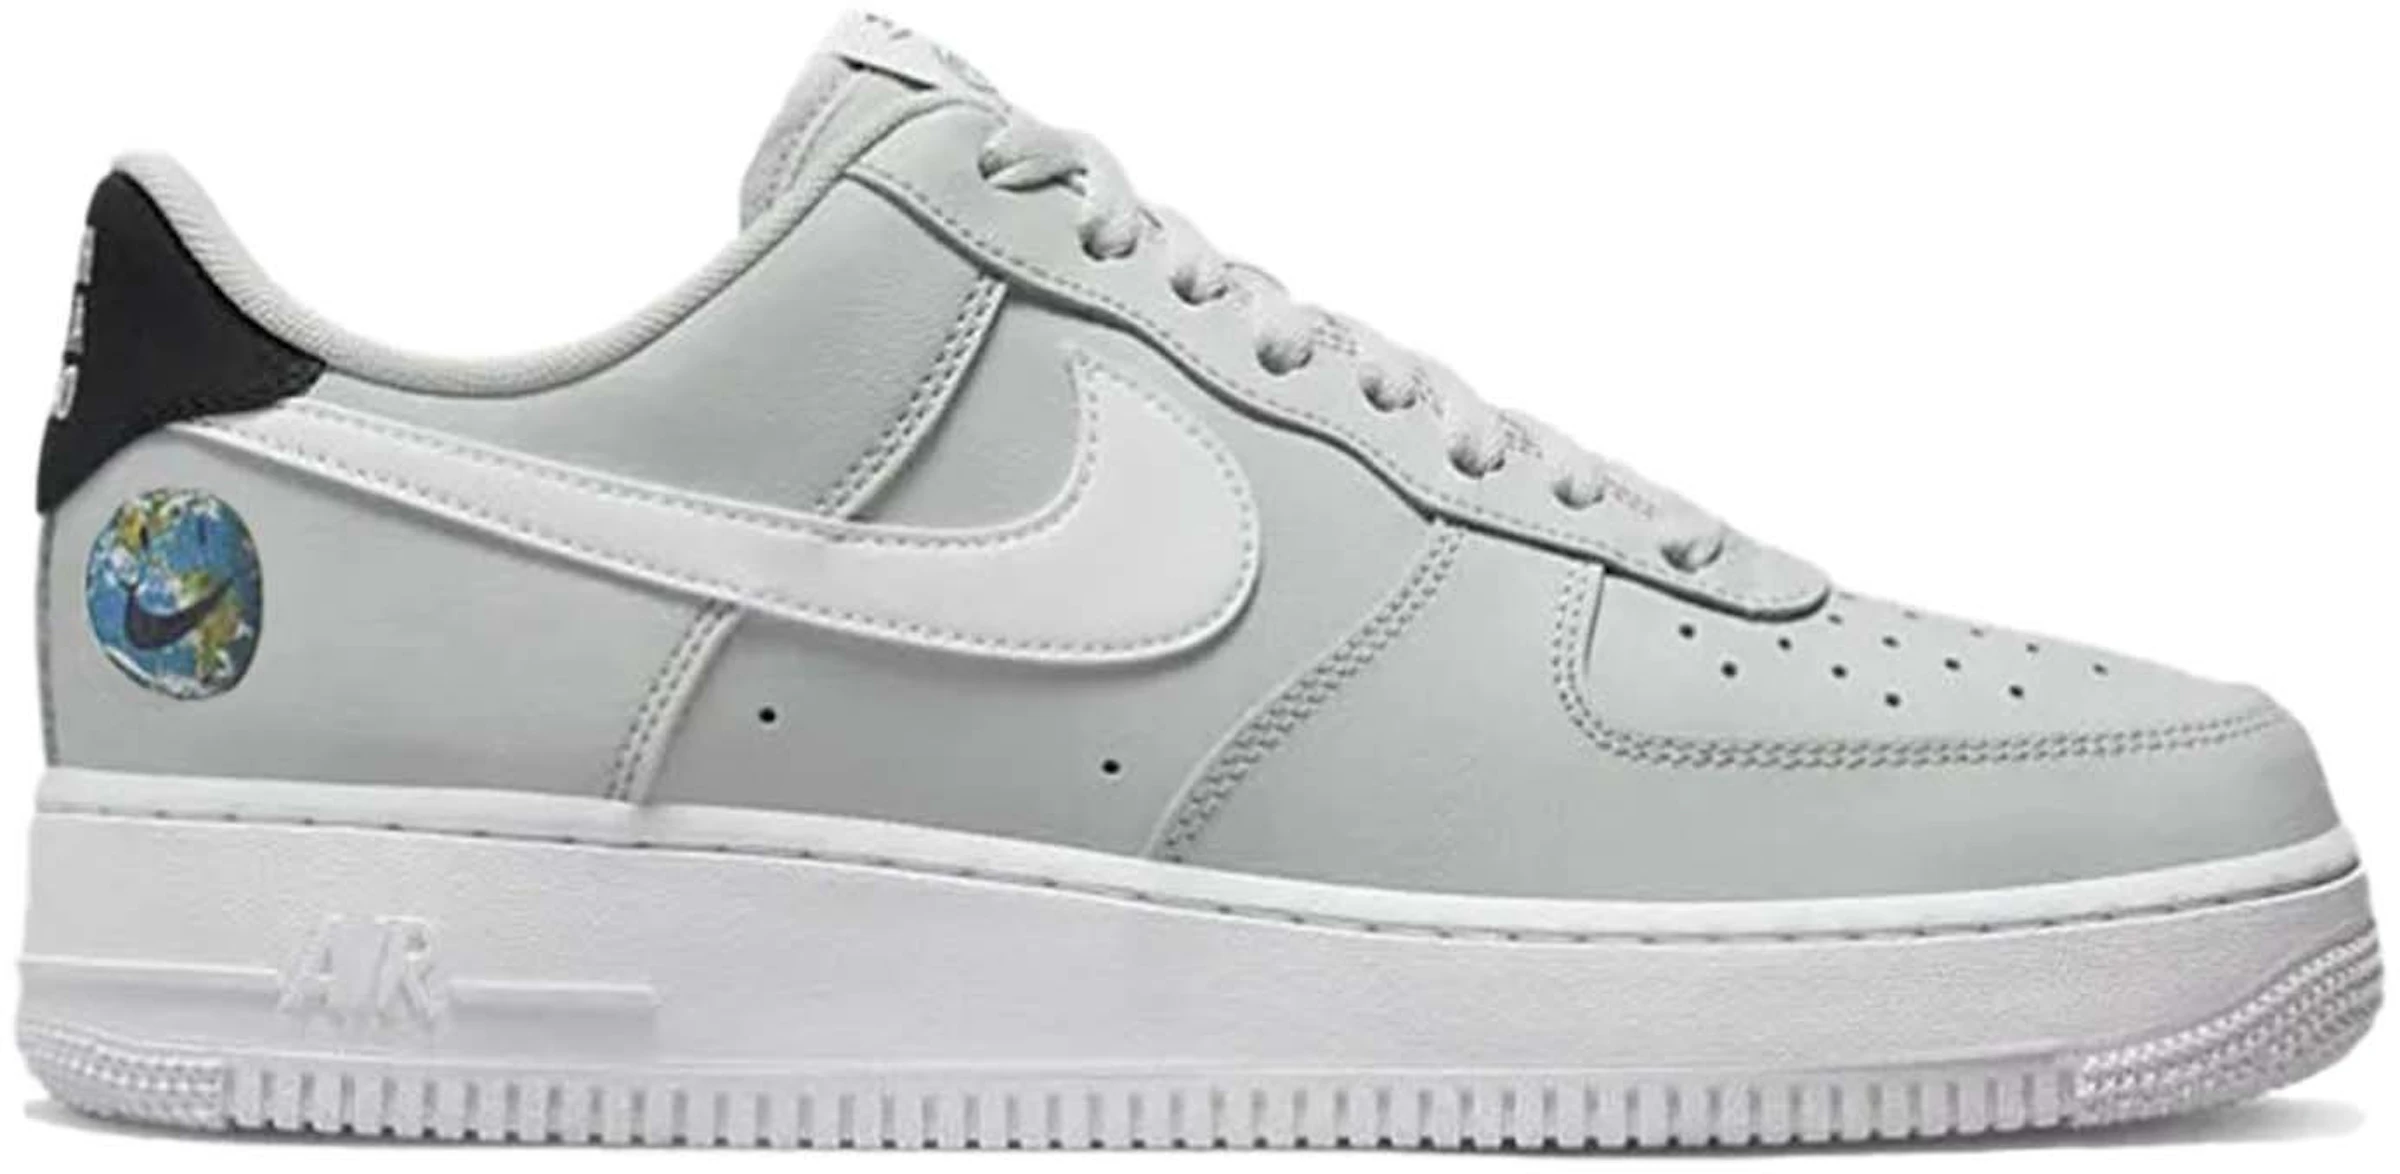 Nike Air Force 1 Low Have a Nike Earth DM0118-001 - US